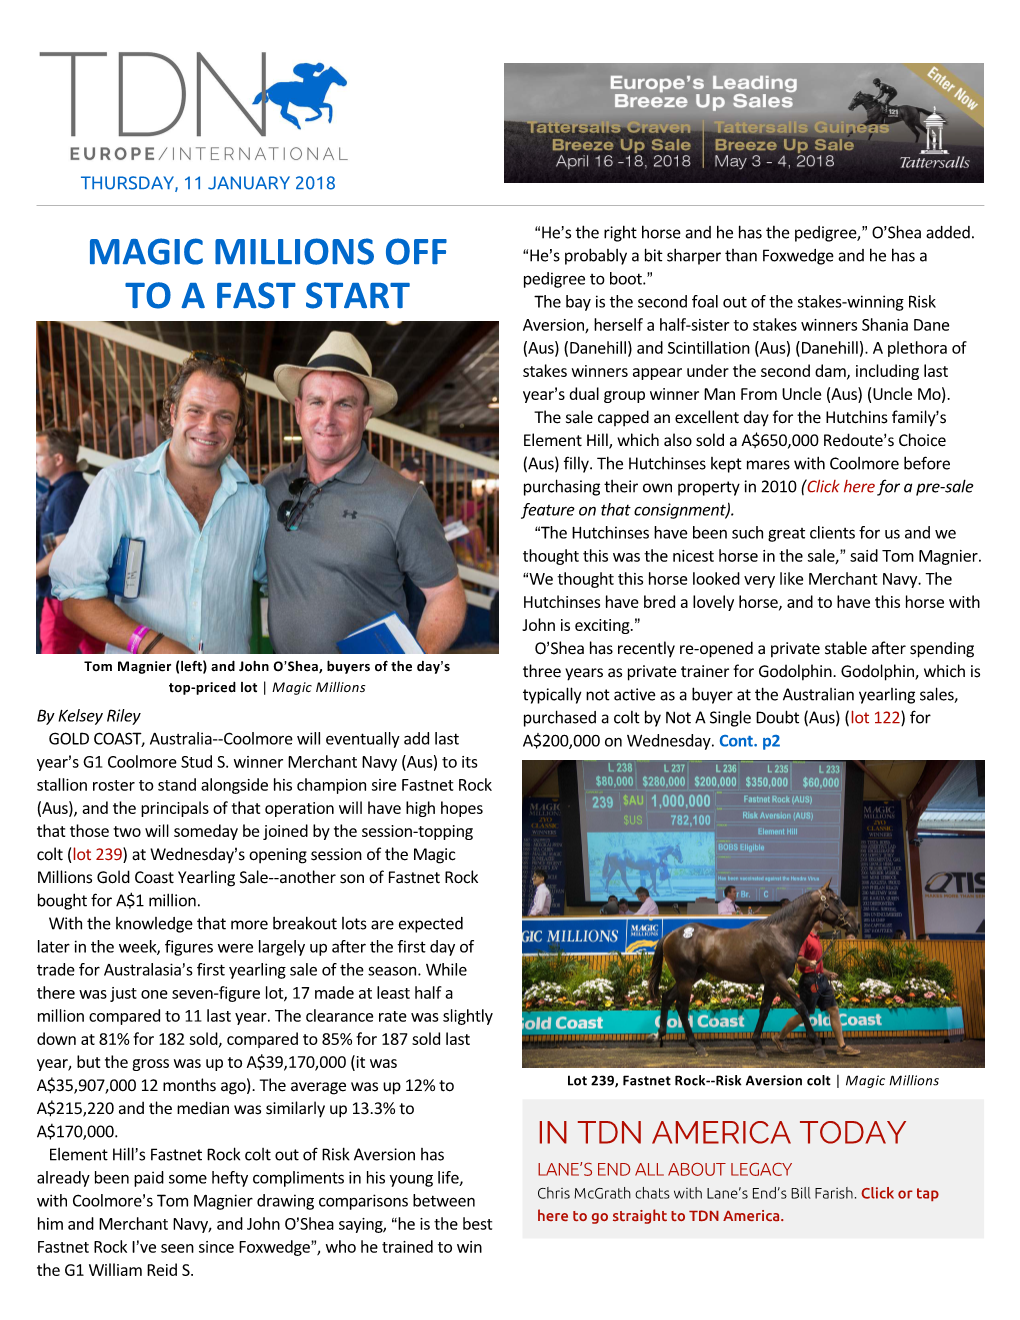 MAGIC MILLIONS OFF to a FAST START by Chris Mcgrath Coolmore Went to A$1 Million for a Colt by Their Resident Stallion Entering His 30Th Year, A.P